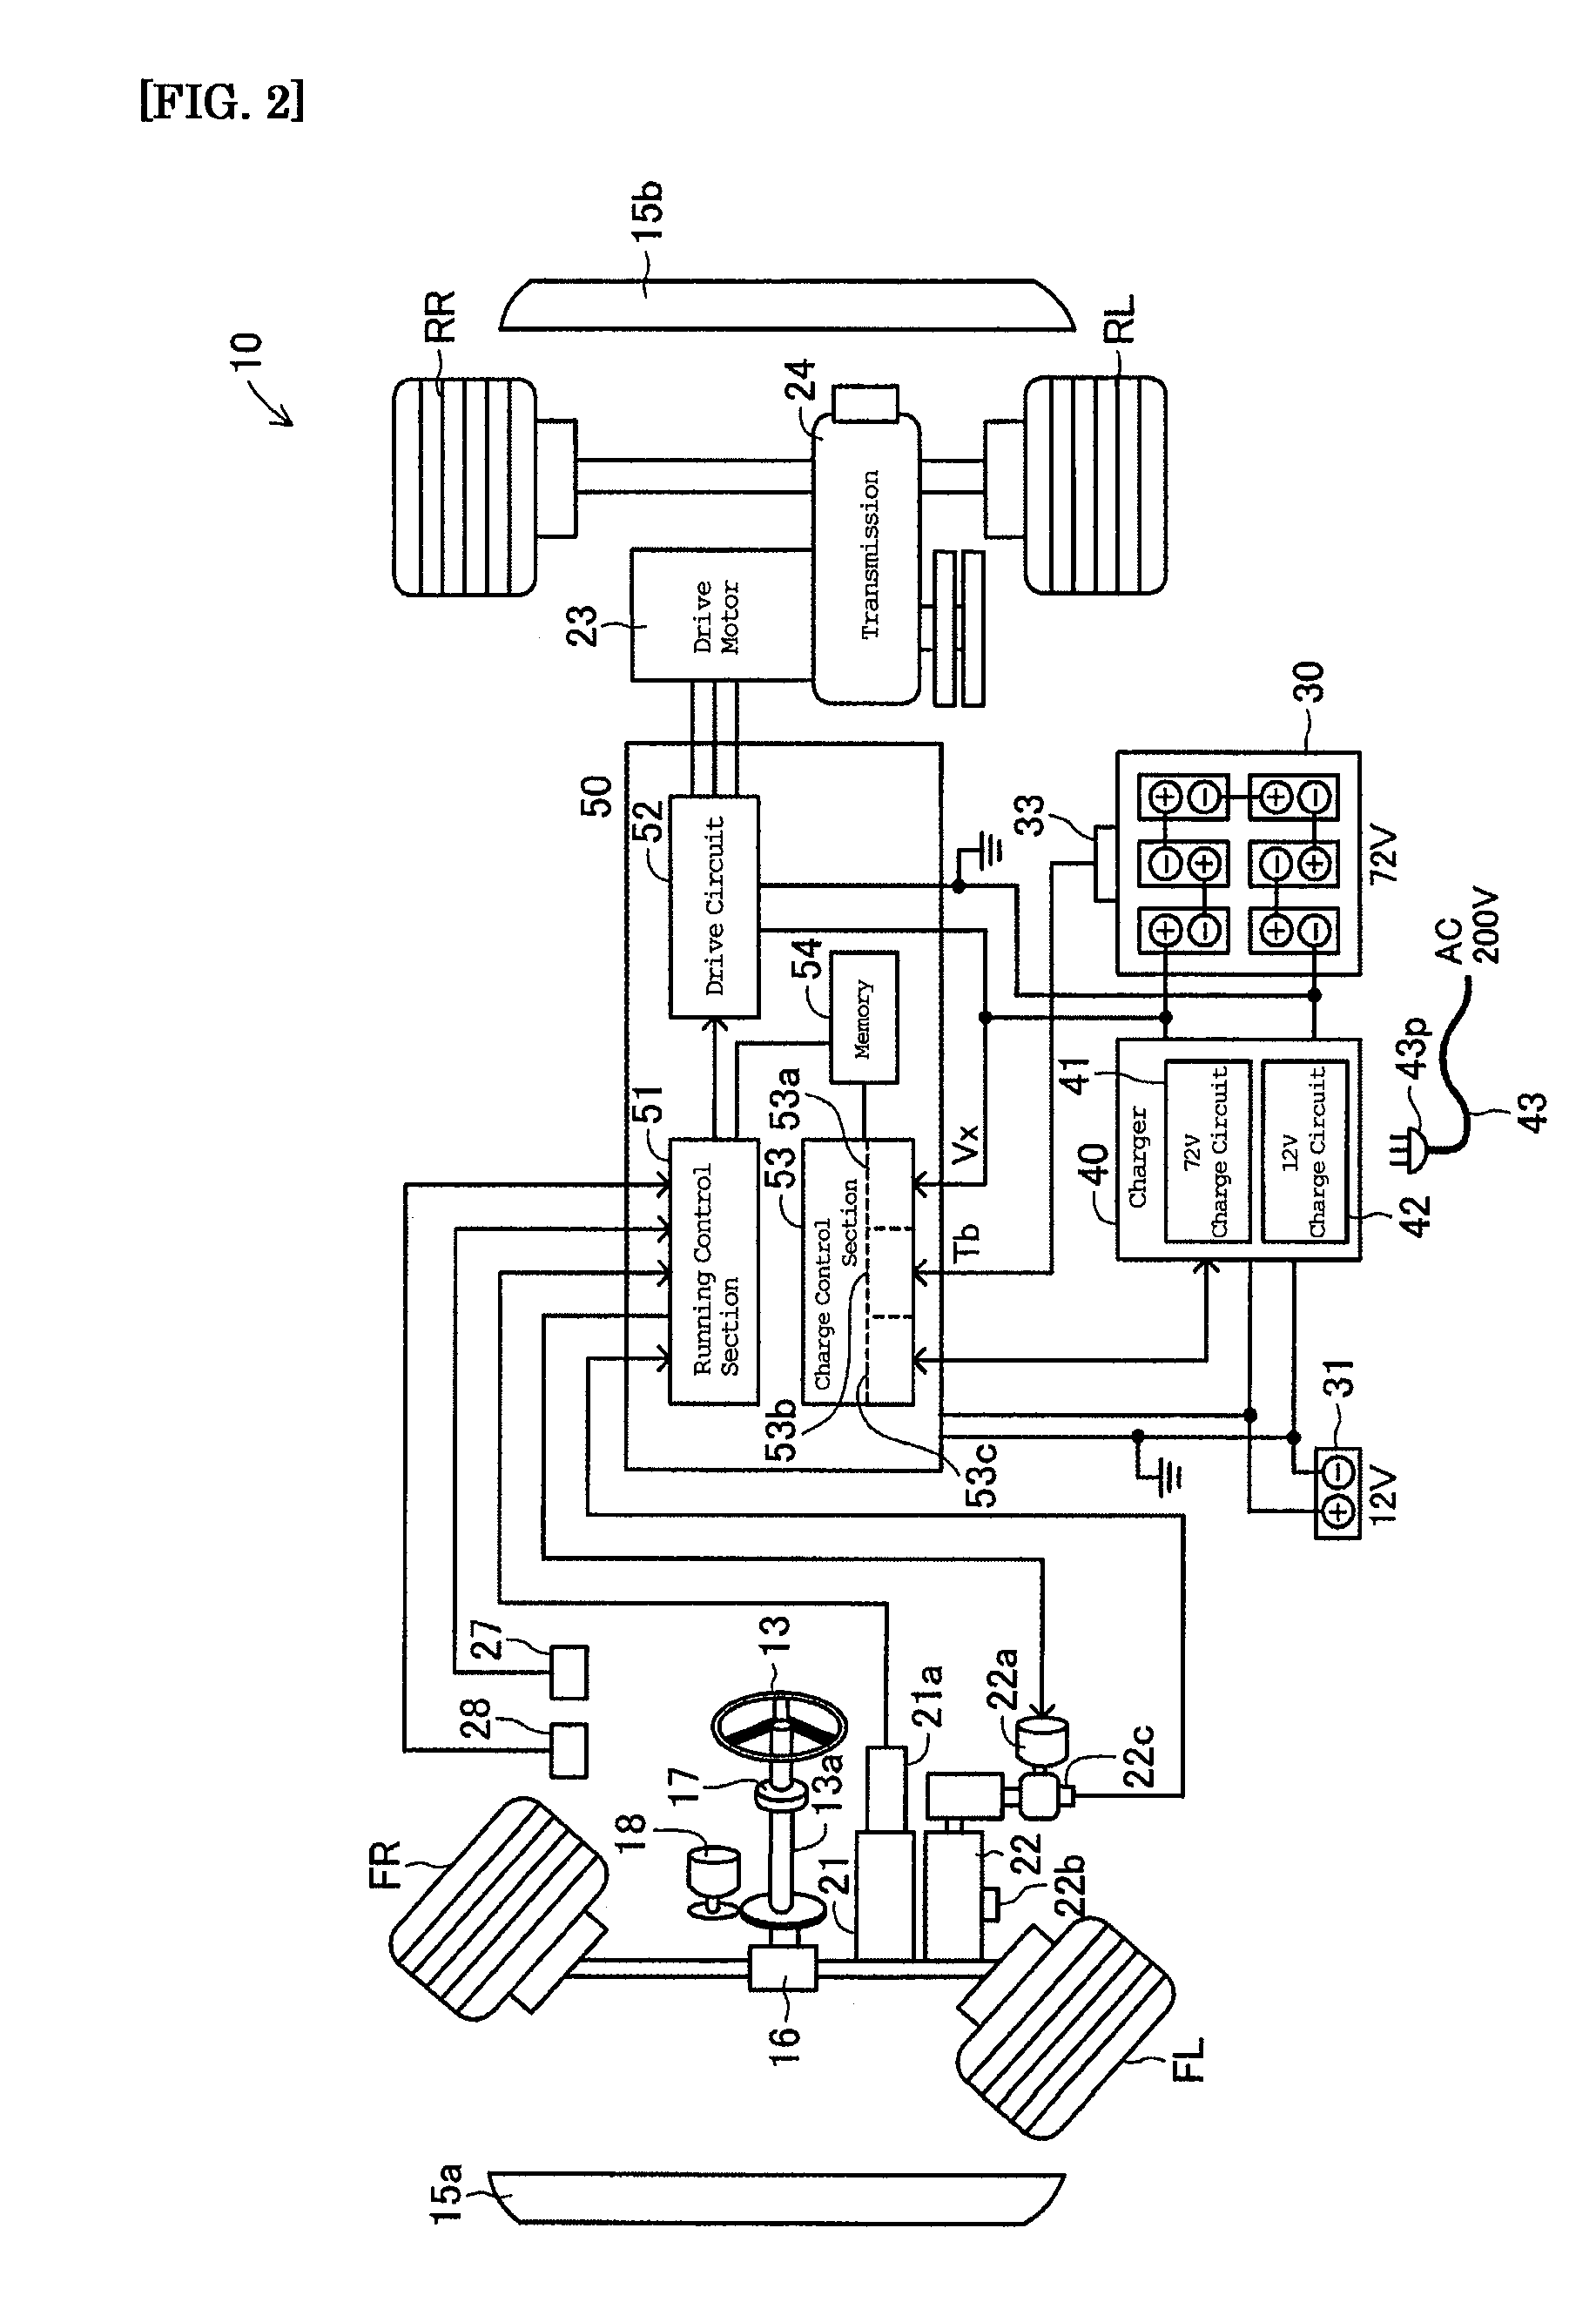 Charge control device for executing a plurality of charge stages